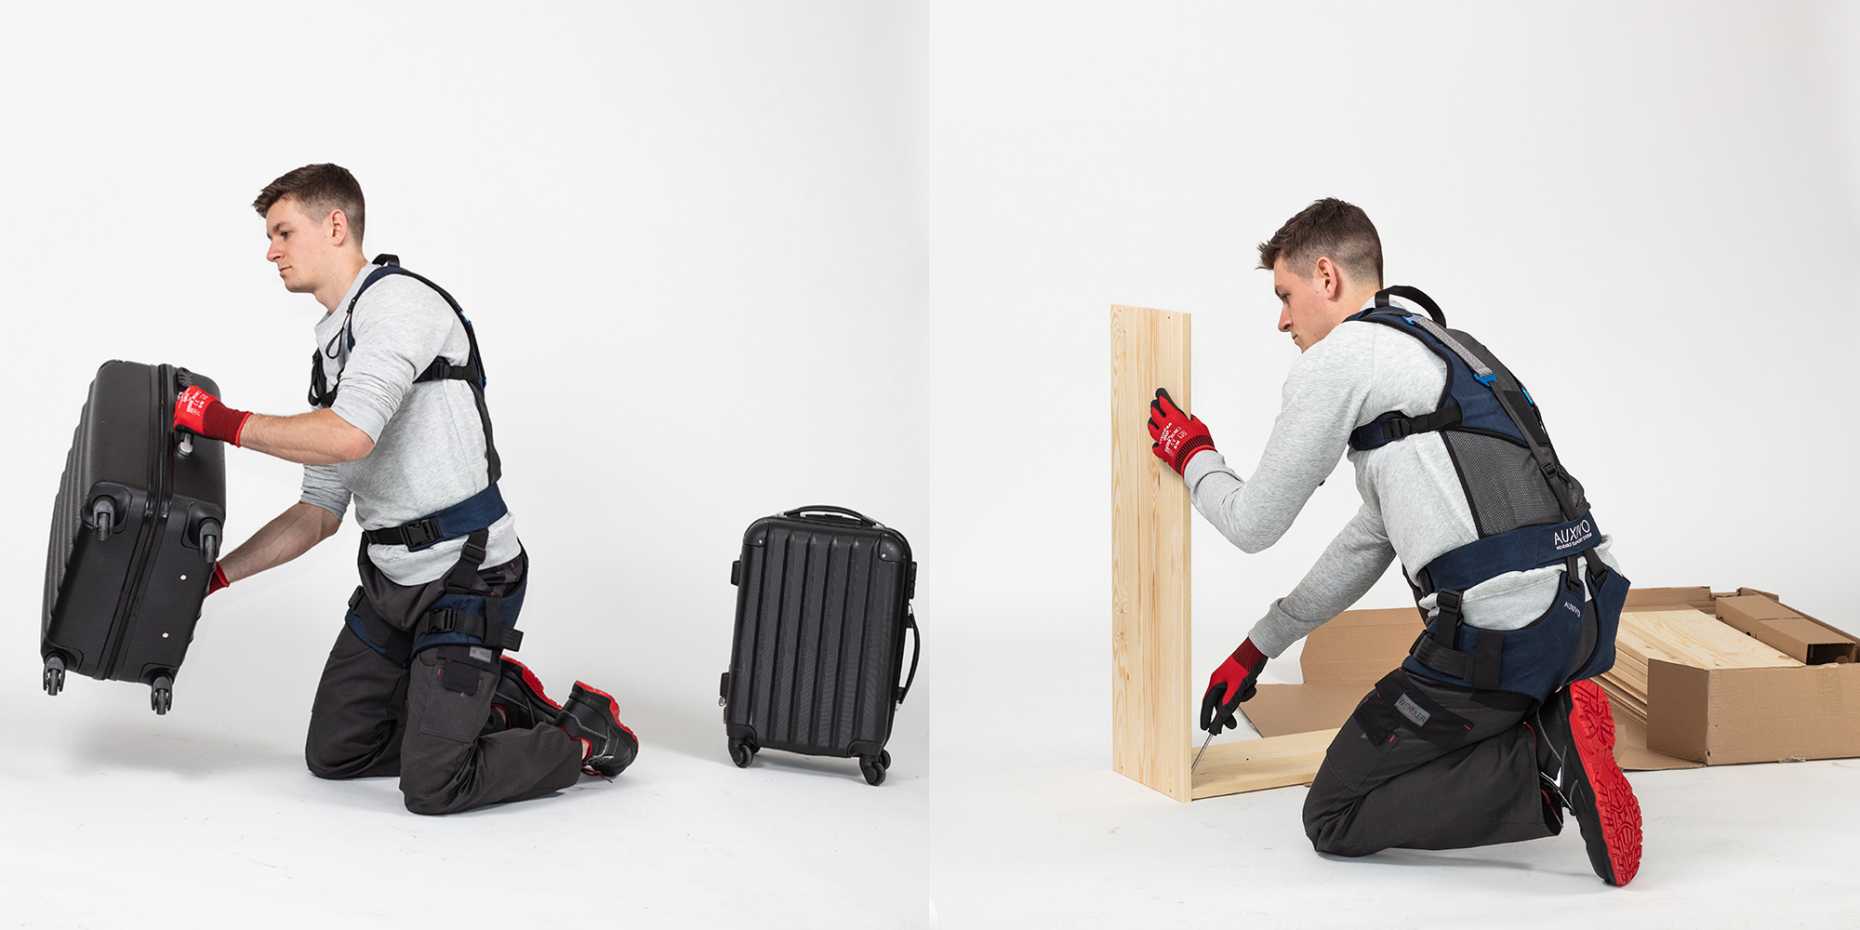 Man wearing exoskelett lifts suitcase and assembles wooden furniture